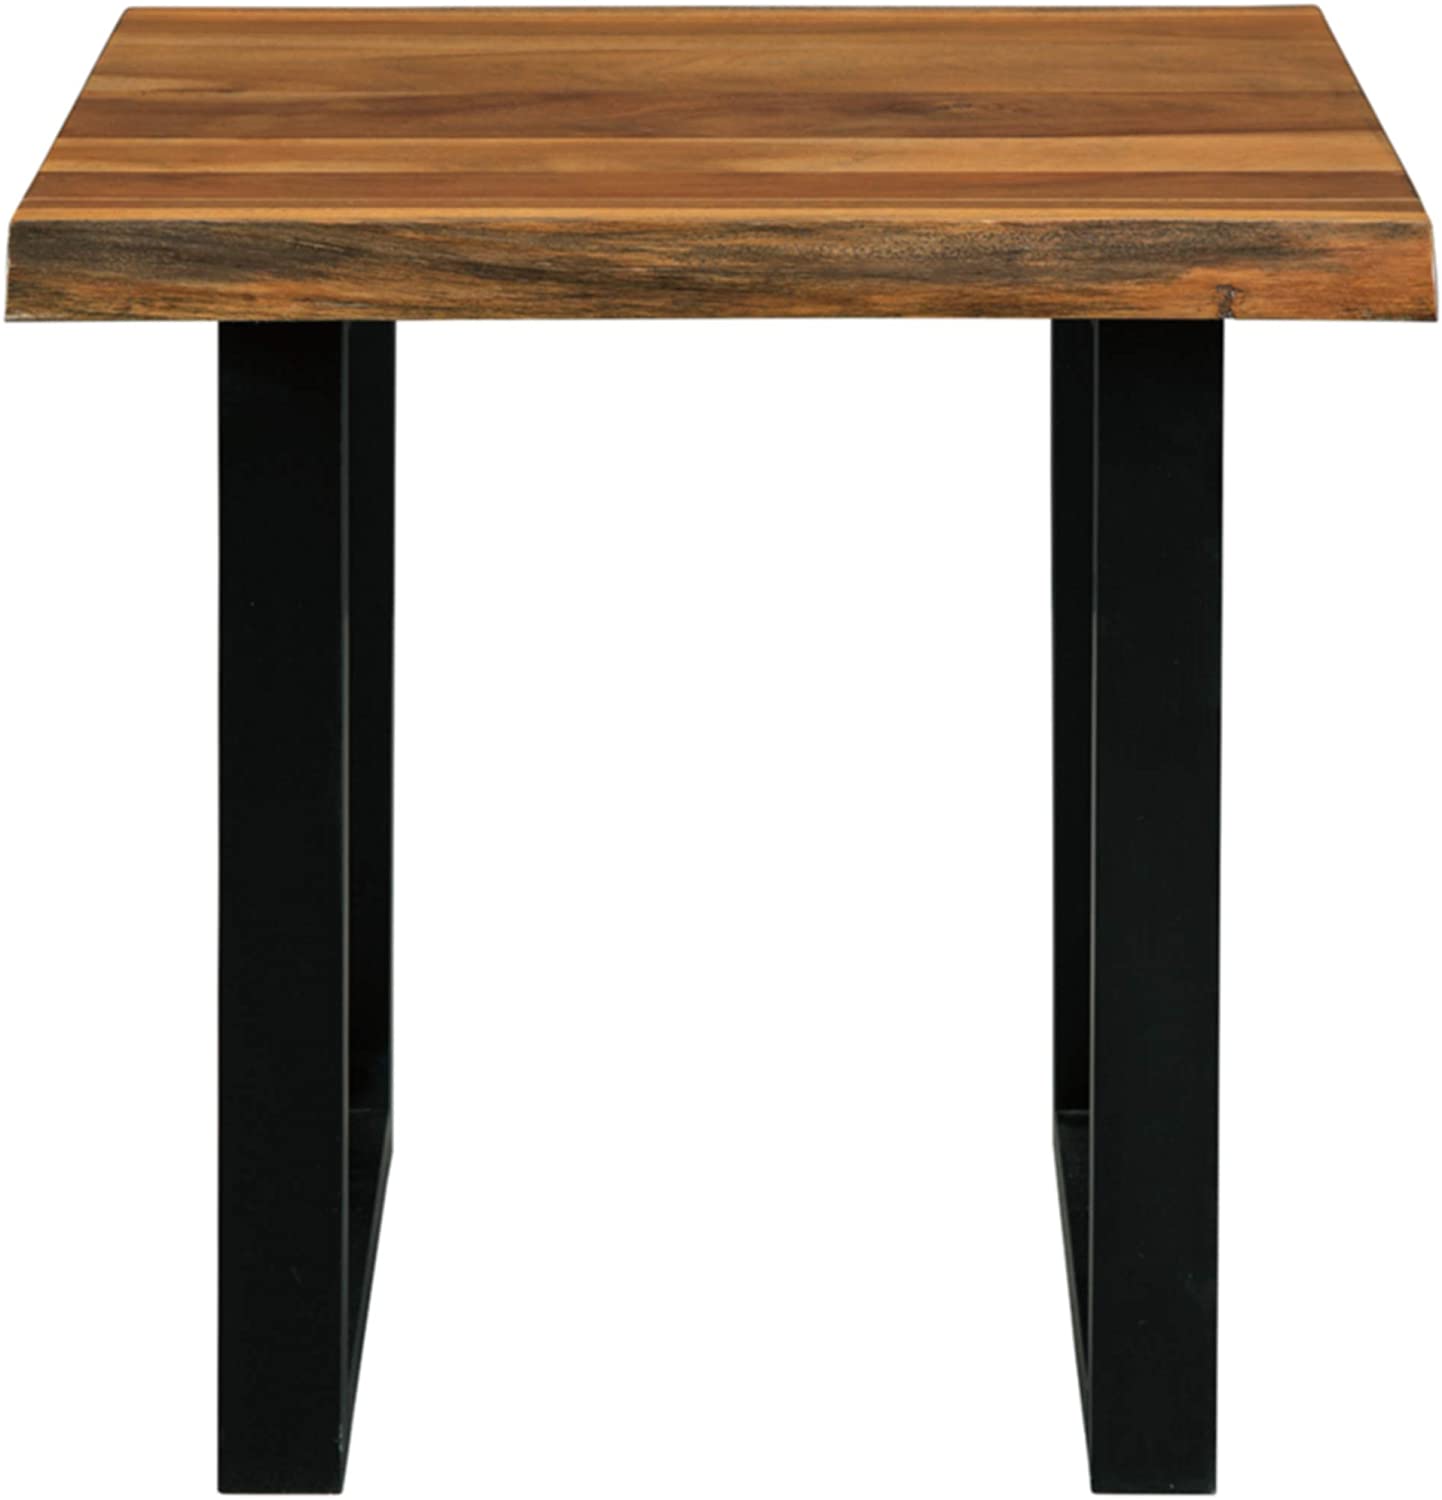 Nest Of Tables: Contemporary Square End Table, Brown/Black